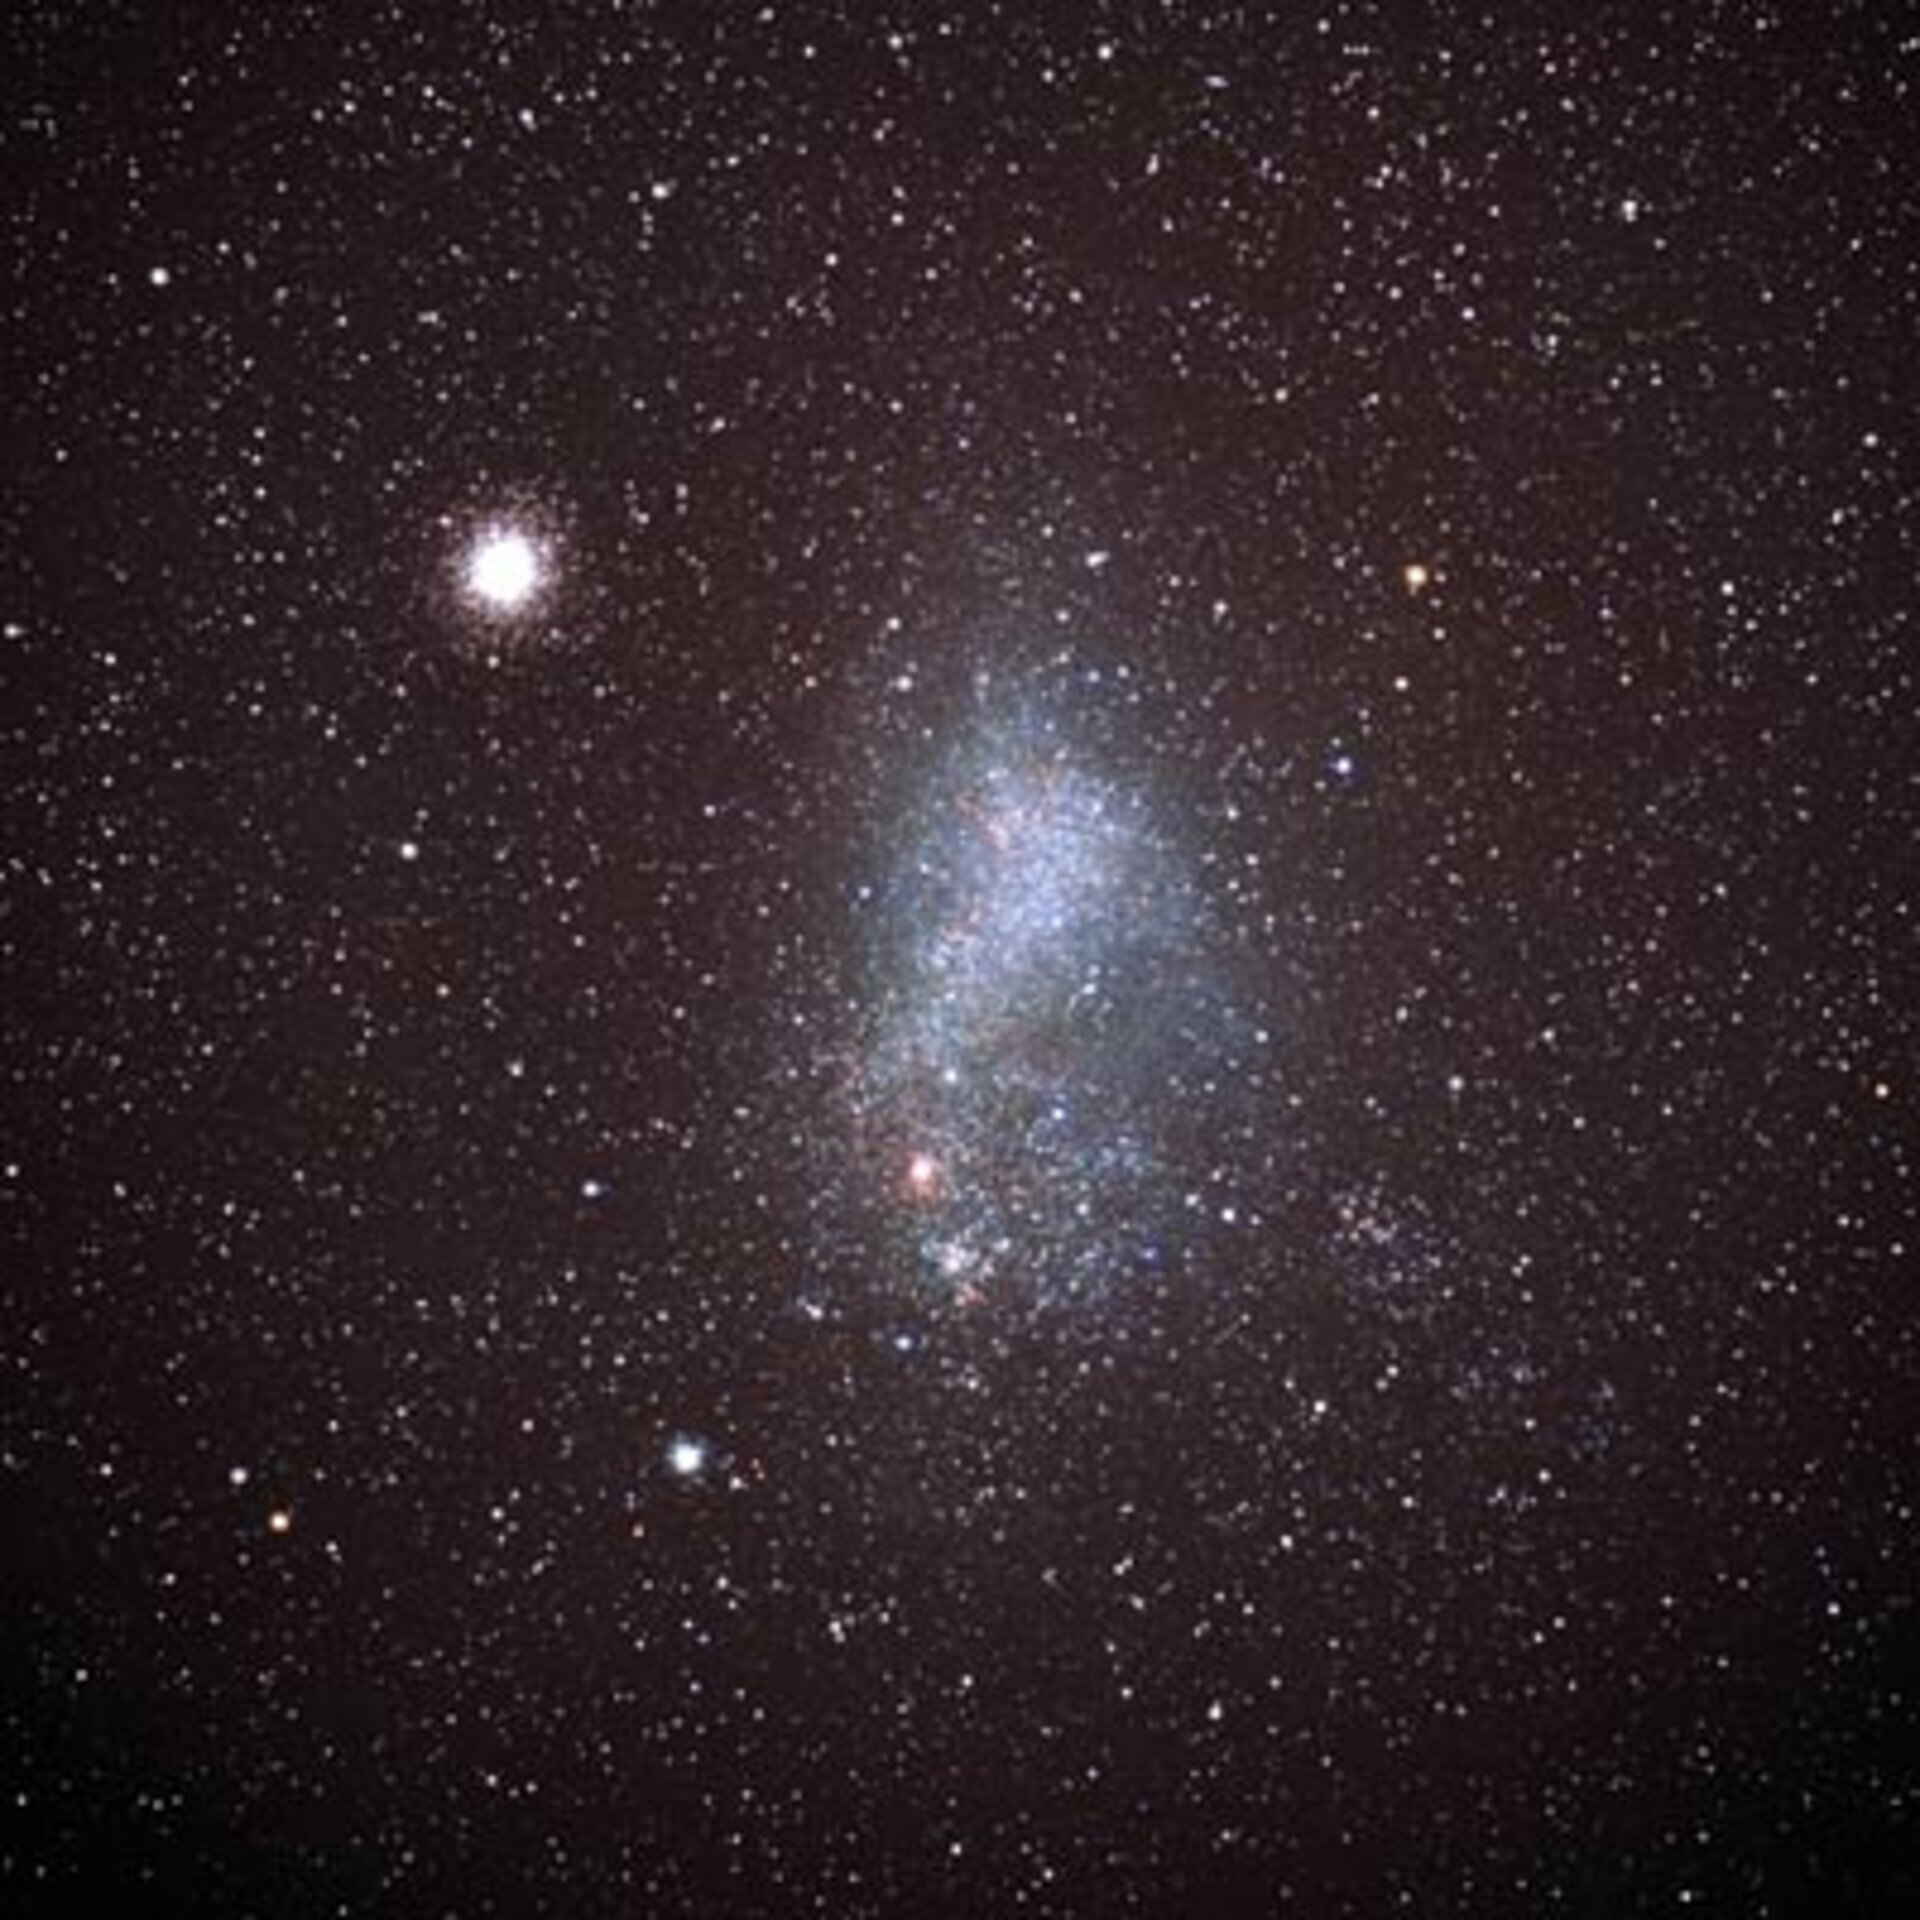 47 Tucanae and the Small Magellanic Cloud